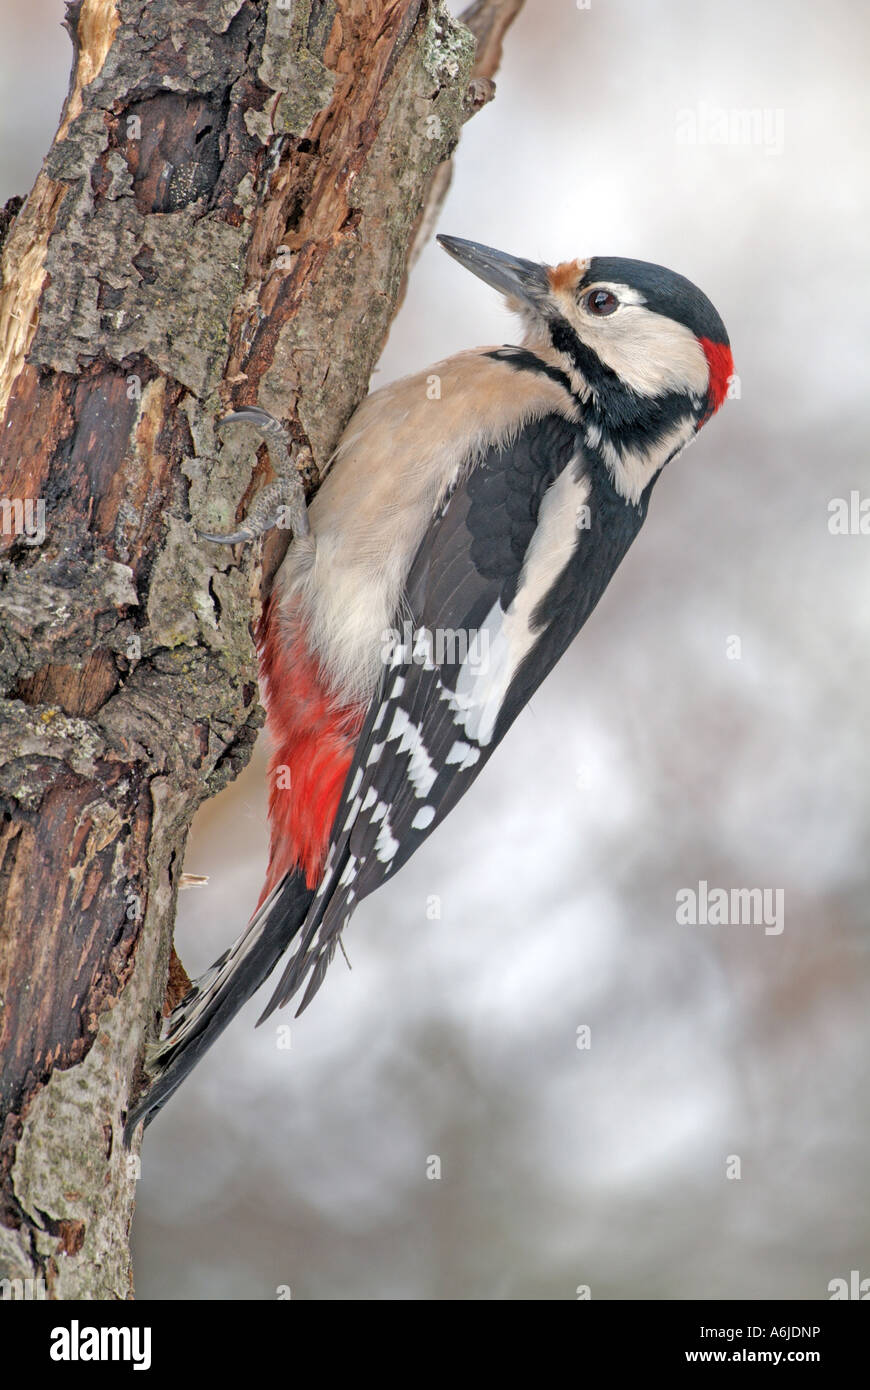 Great Spotted Woodpecker (Picoides major, Dendrocopos major), clinging to tree trunk Stock Photo